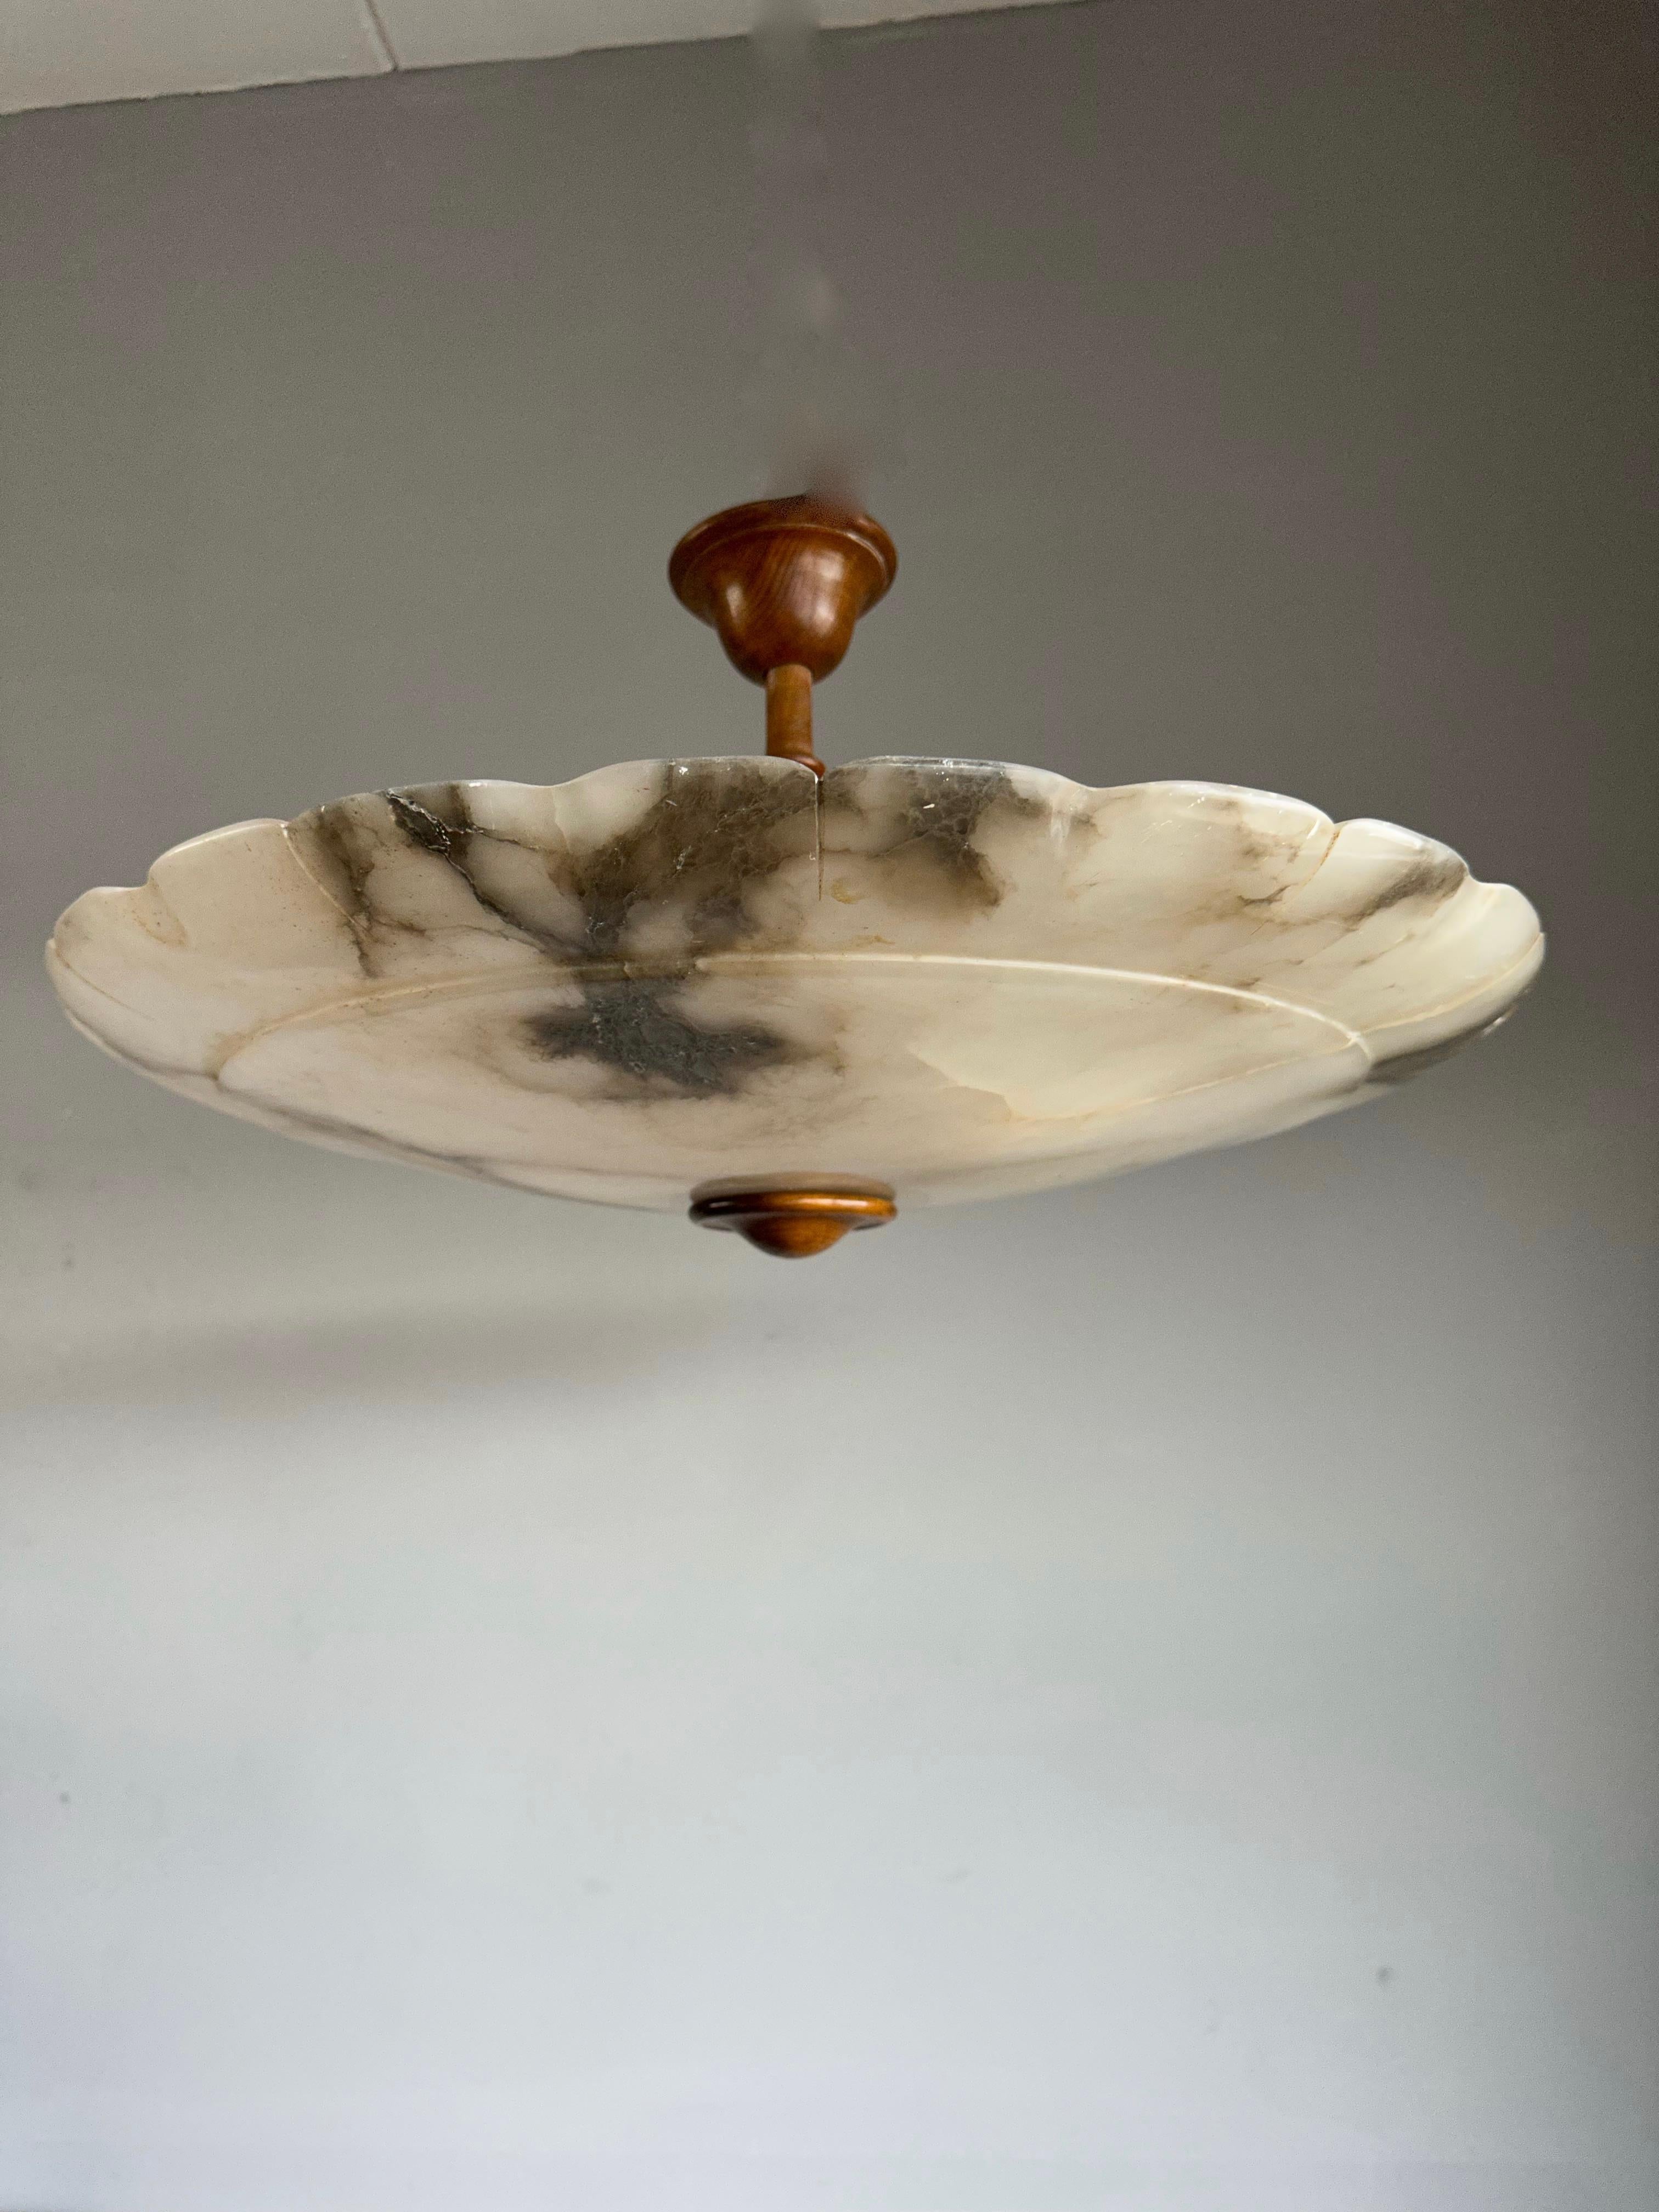 One of the largest antique alabaster flush mounts from the early 1900s.

This rare, almost flat and extra large size alabaster light fixture also is of a beautiful design. The beautiful and polished alabaster shade comes with flower petal like